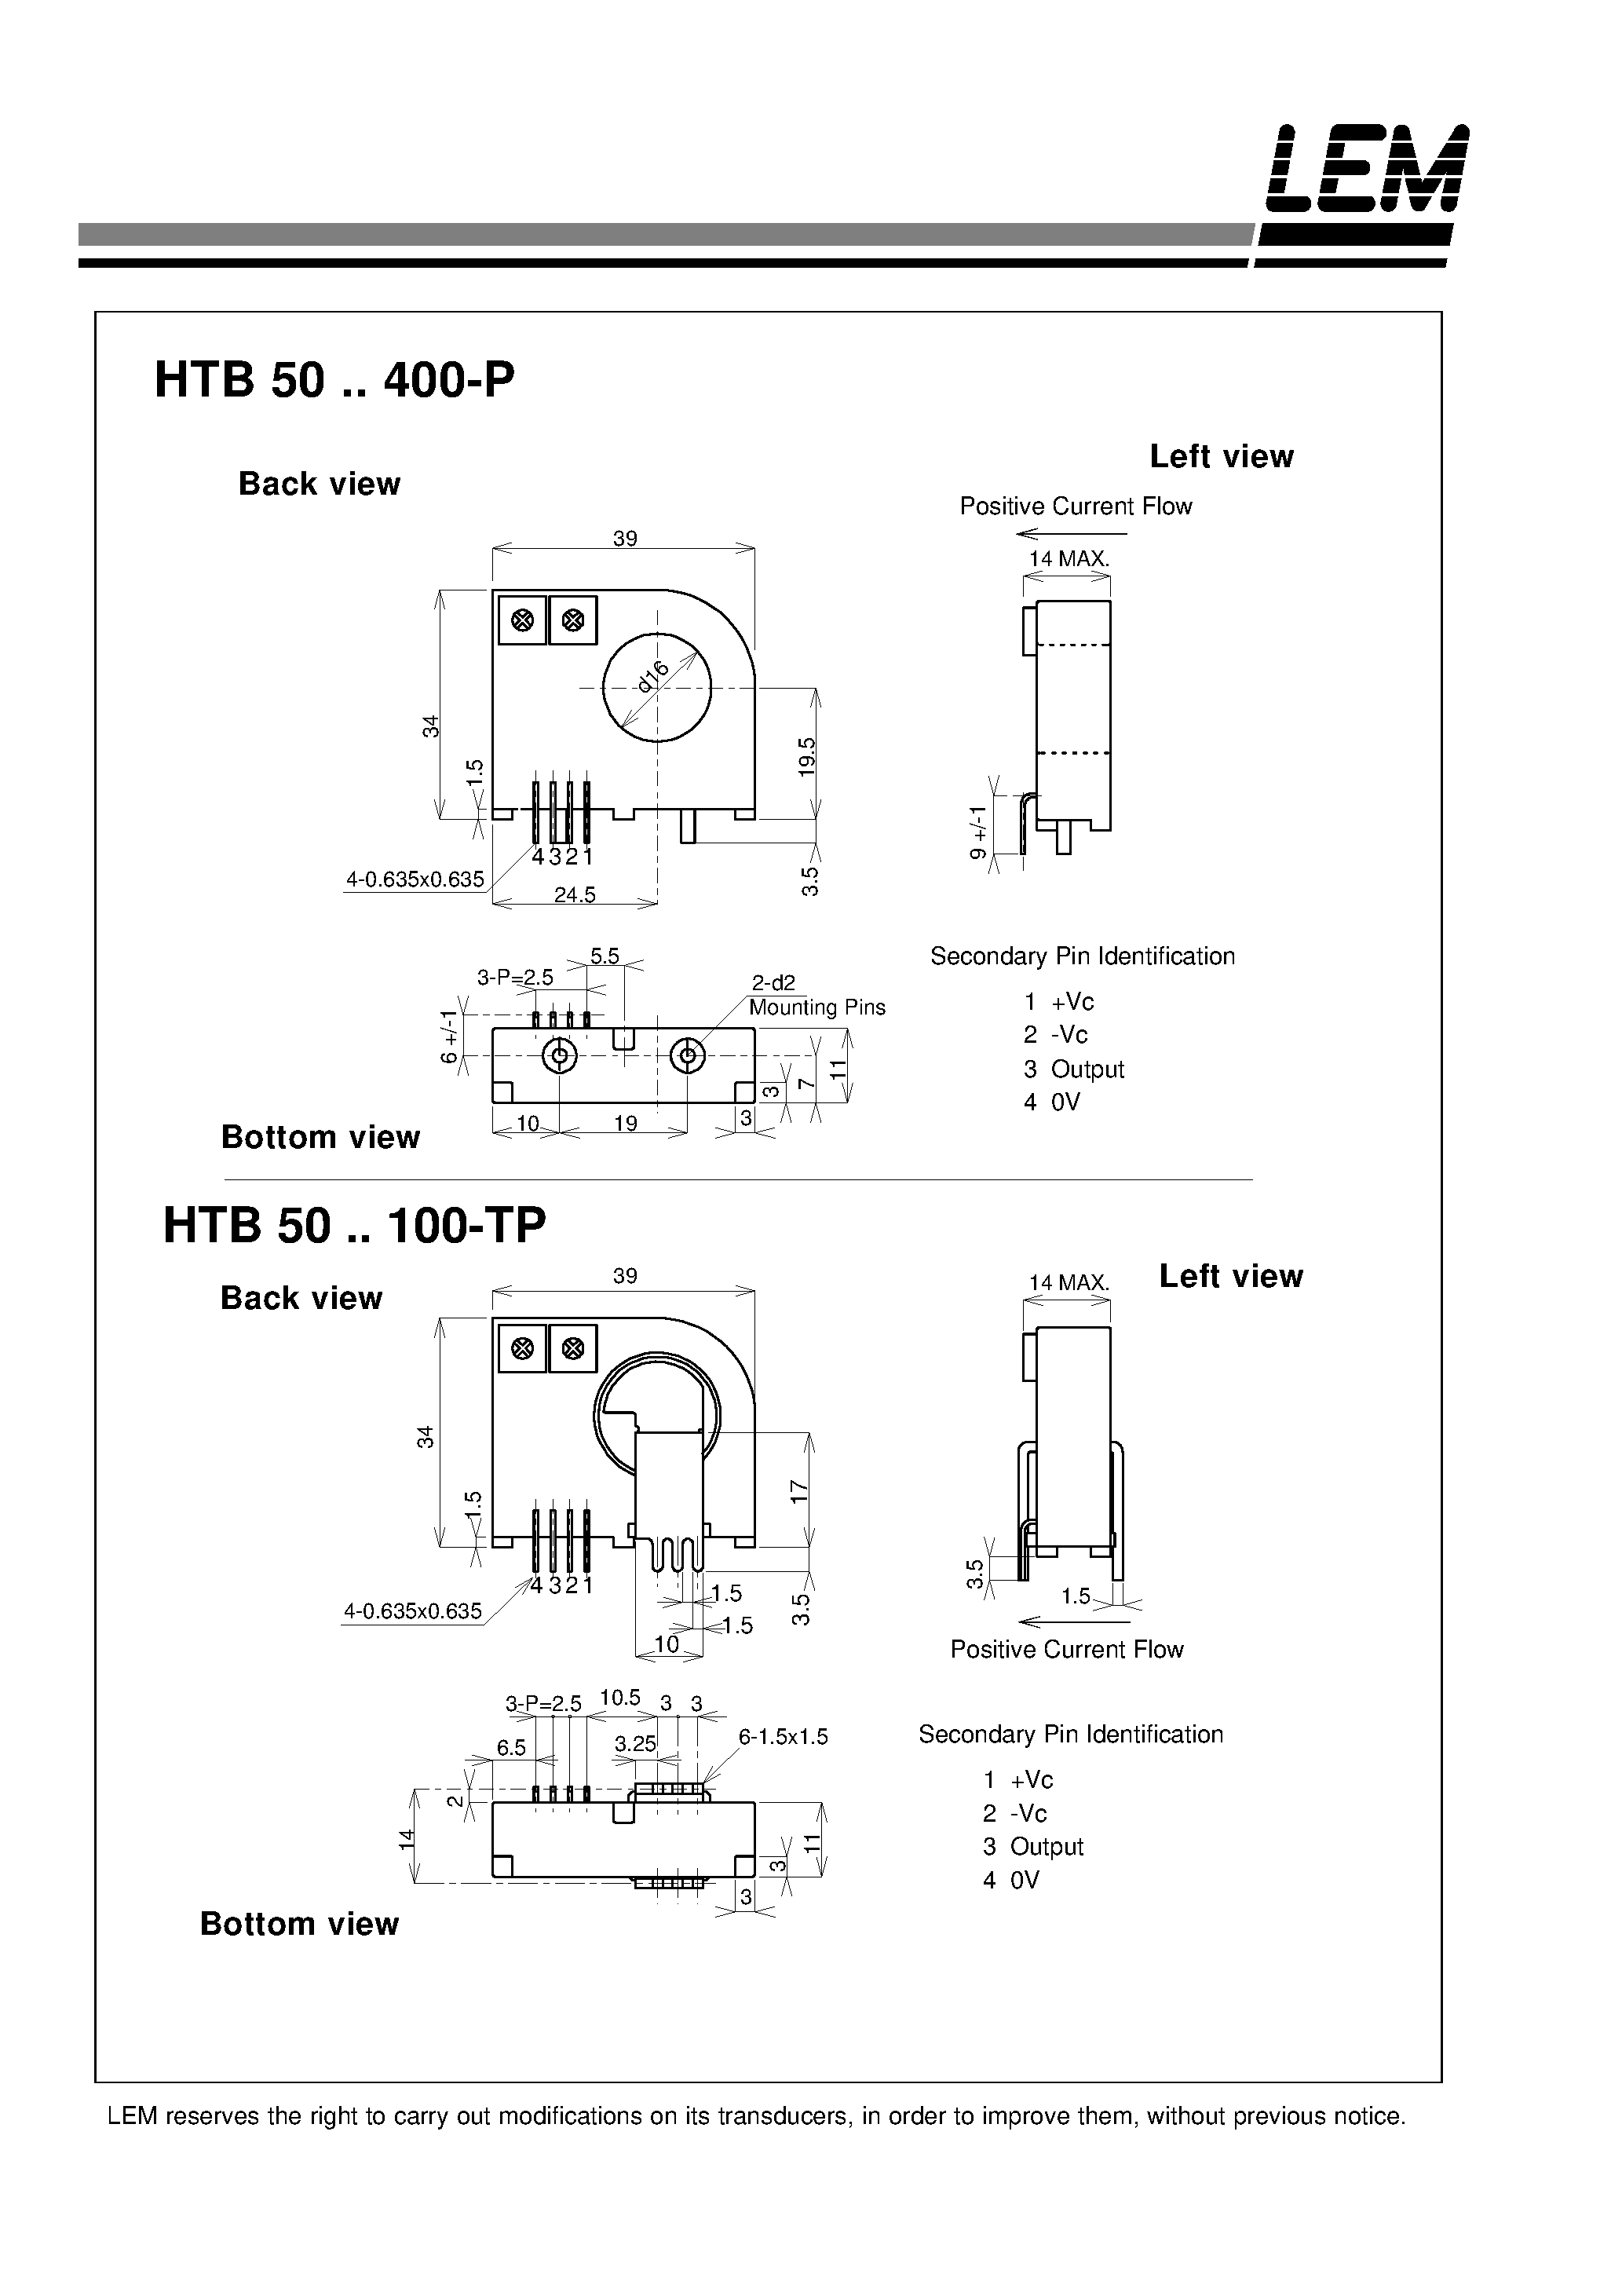 Datasheet HTB400-P - Current Transducers HTB 50~400-P and HTB 50~100-TP page 2